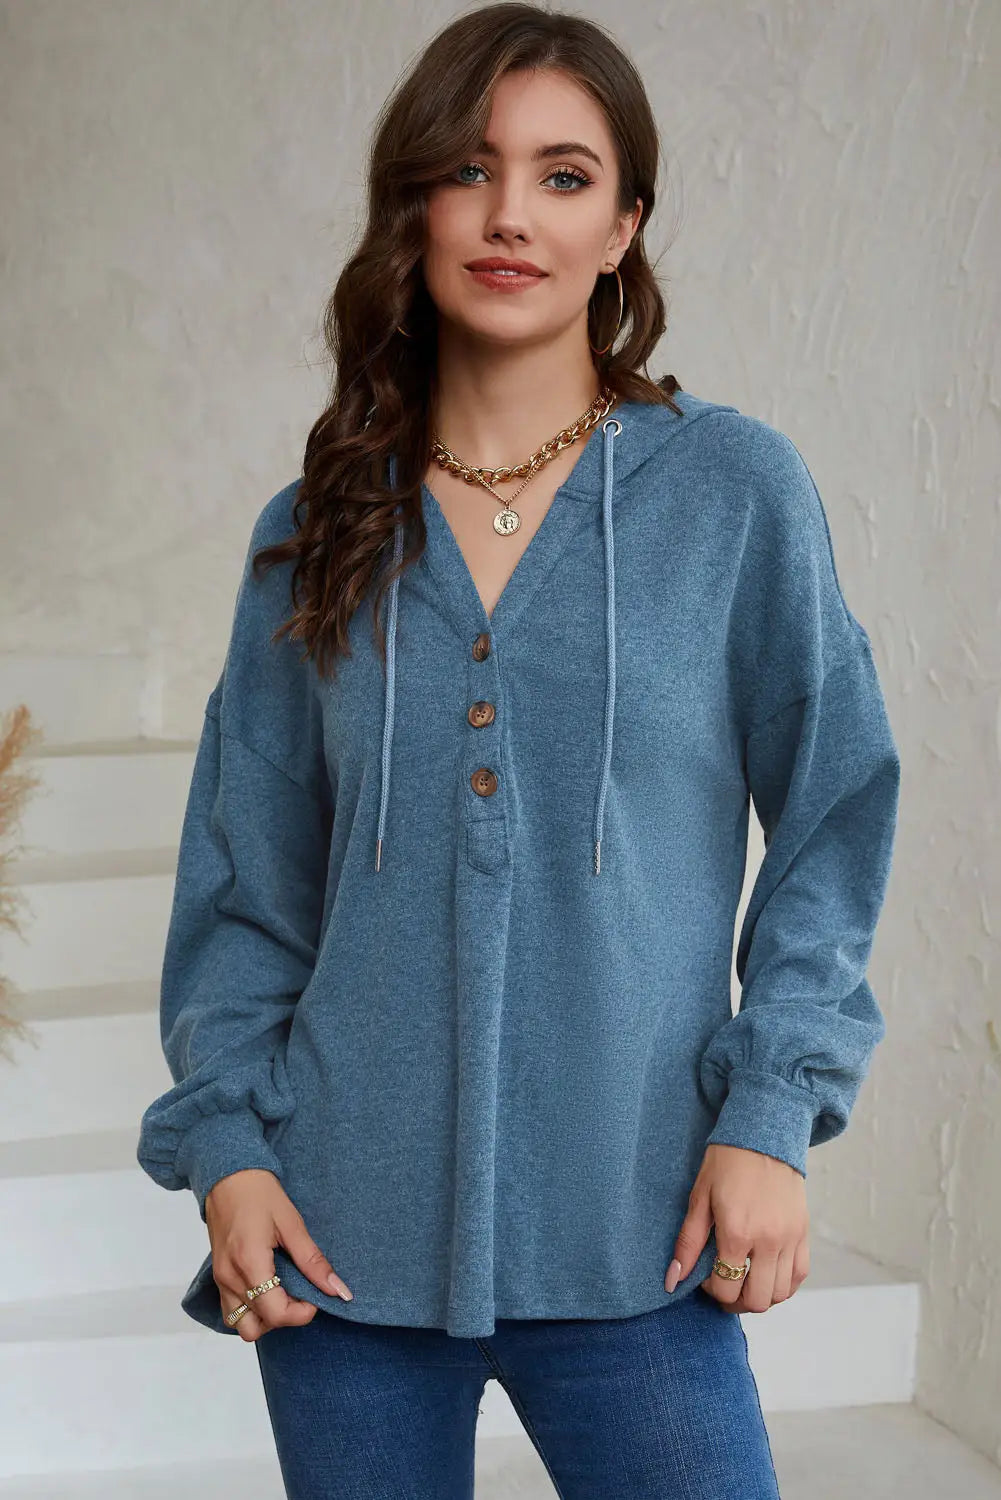 Buttoned high and low hem hoodie - sky blue / s / 95% polyester + 5% spandex - sweatshirts & hoodies